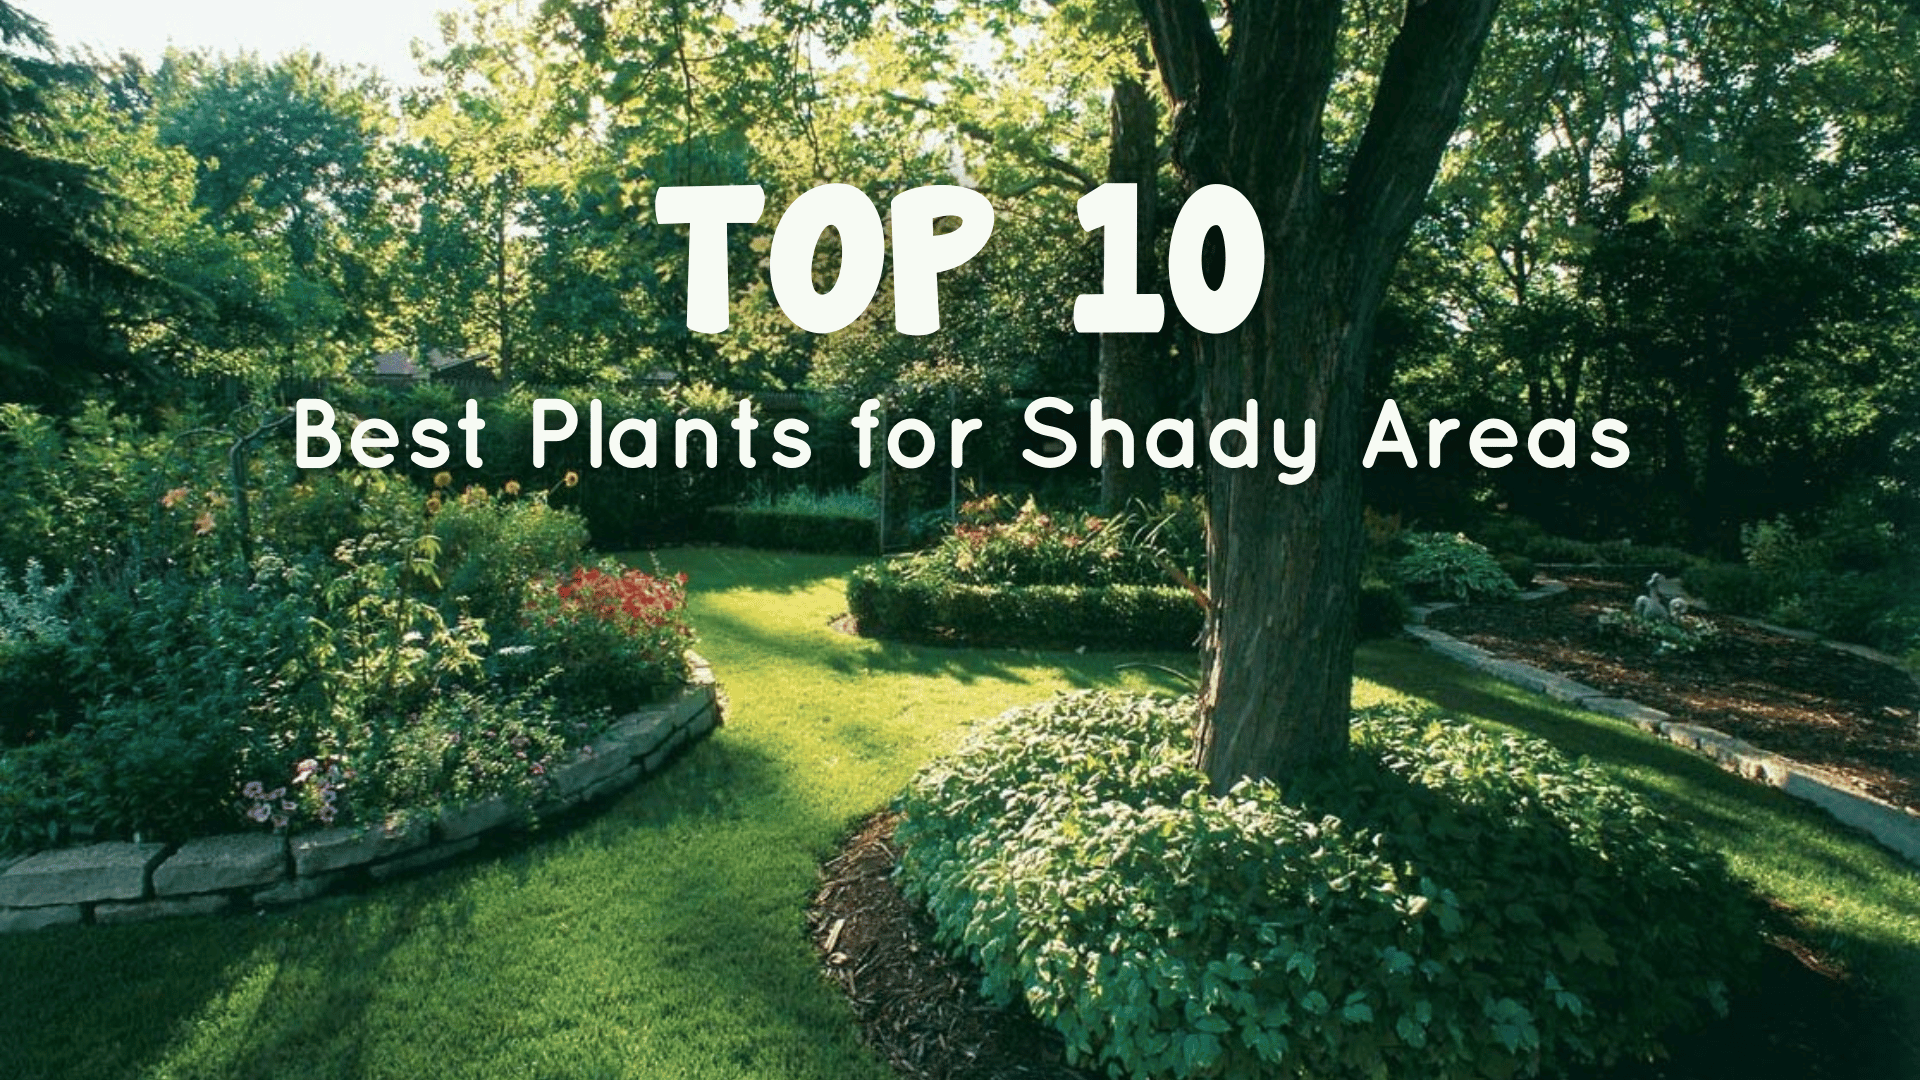 Text overlay stating "top 10 best indoor plants for shady areas" on a background of a lush garden with various green plants and trees under dappled sunlight.